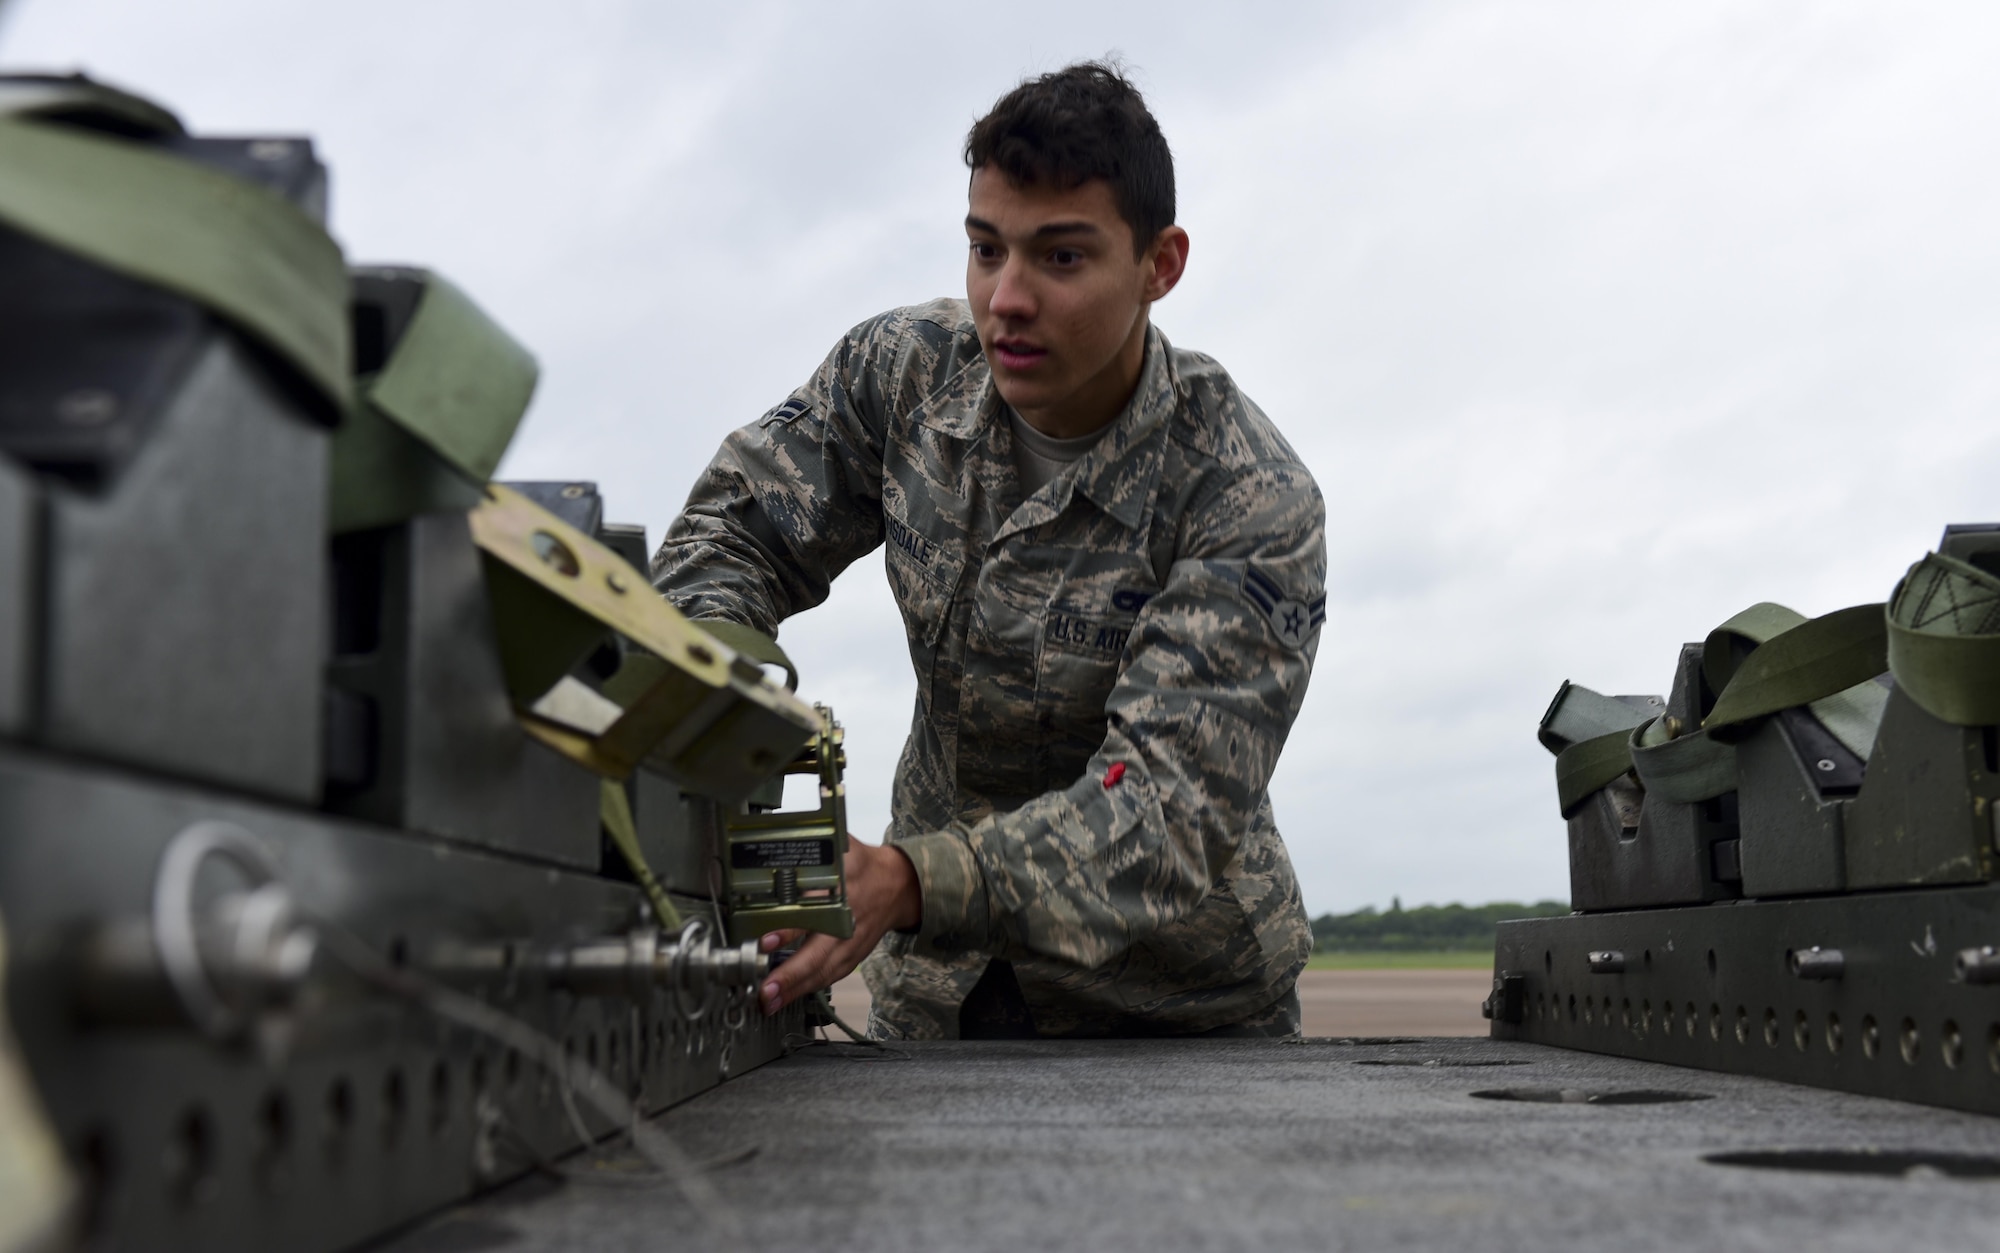 U.S. Air Force Airman 1st Class Julian Tisdale, 2nd Aircraft Maintenance Squadron load crew team member, inspects inert, (non-explosive) Quick Strike MK 62 mines at RAF Fairford, U.K., June 5, 2017. Bomber crews are participating in BALTOPS 2017, an annual, multinational, maritime-focused exercise designed to strengthen interoperability and cohesiveness between NATO allies and partnered nations. (U.S. Air Force photo by Airman 1st Class Randahl J. Jenson)